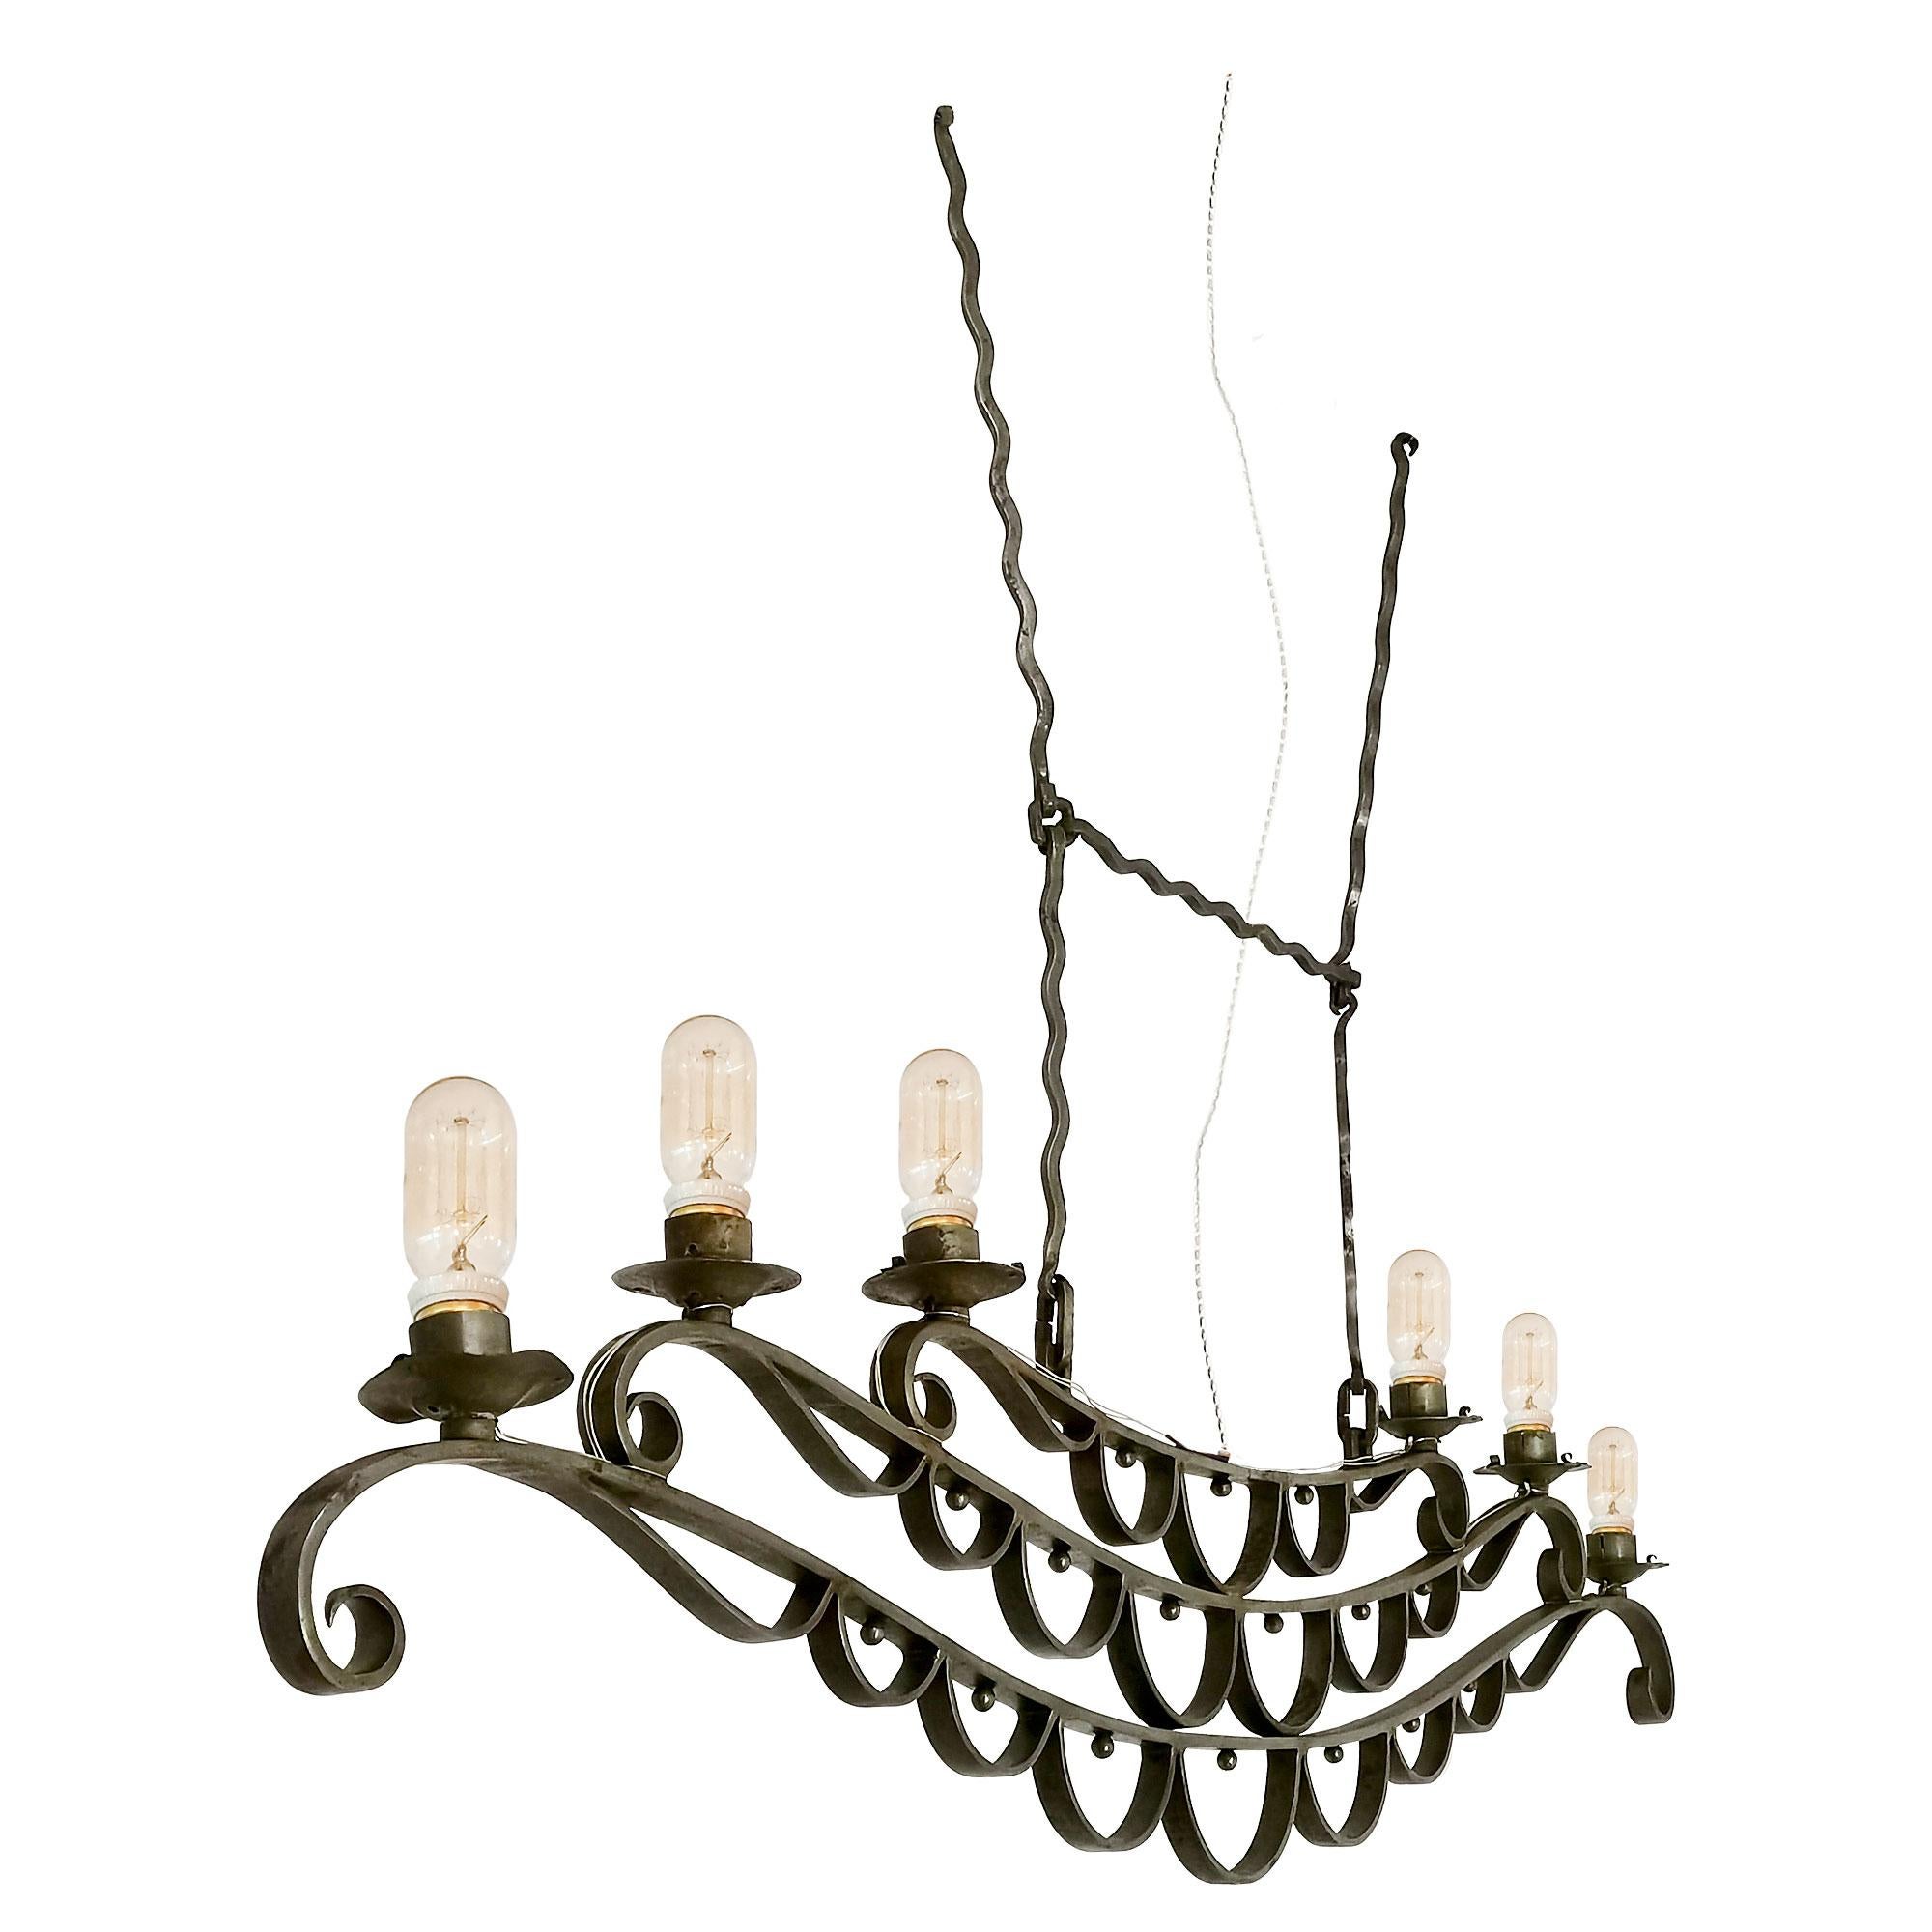 Large ceiling light in wrought iron, originally made as oil lamp, later electrified. Completely restored, metal polished and new wiring.

France, 1890-1900.